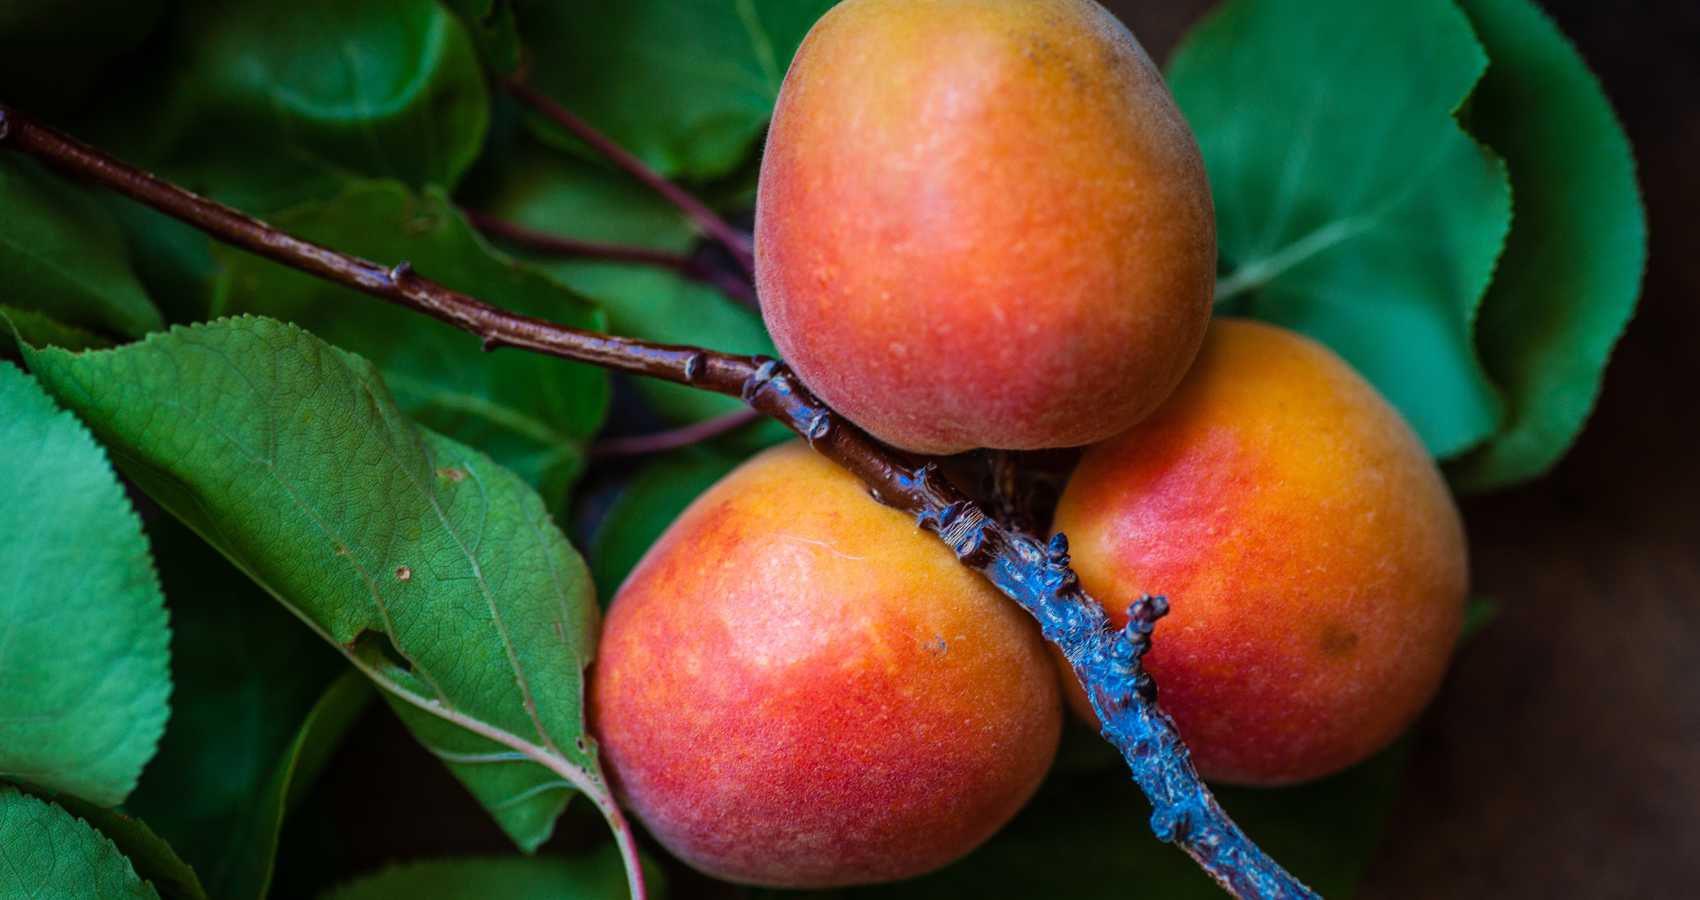 Ode to Mangoes, a poem by Deepali Pradhan at Spillwords.com